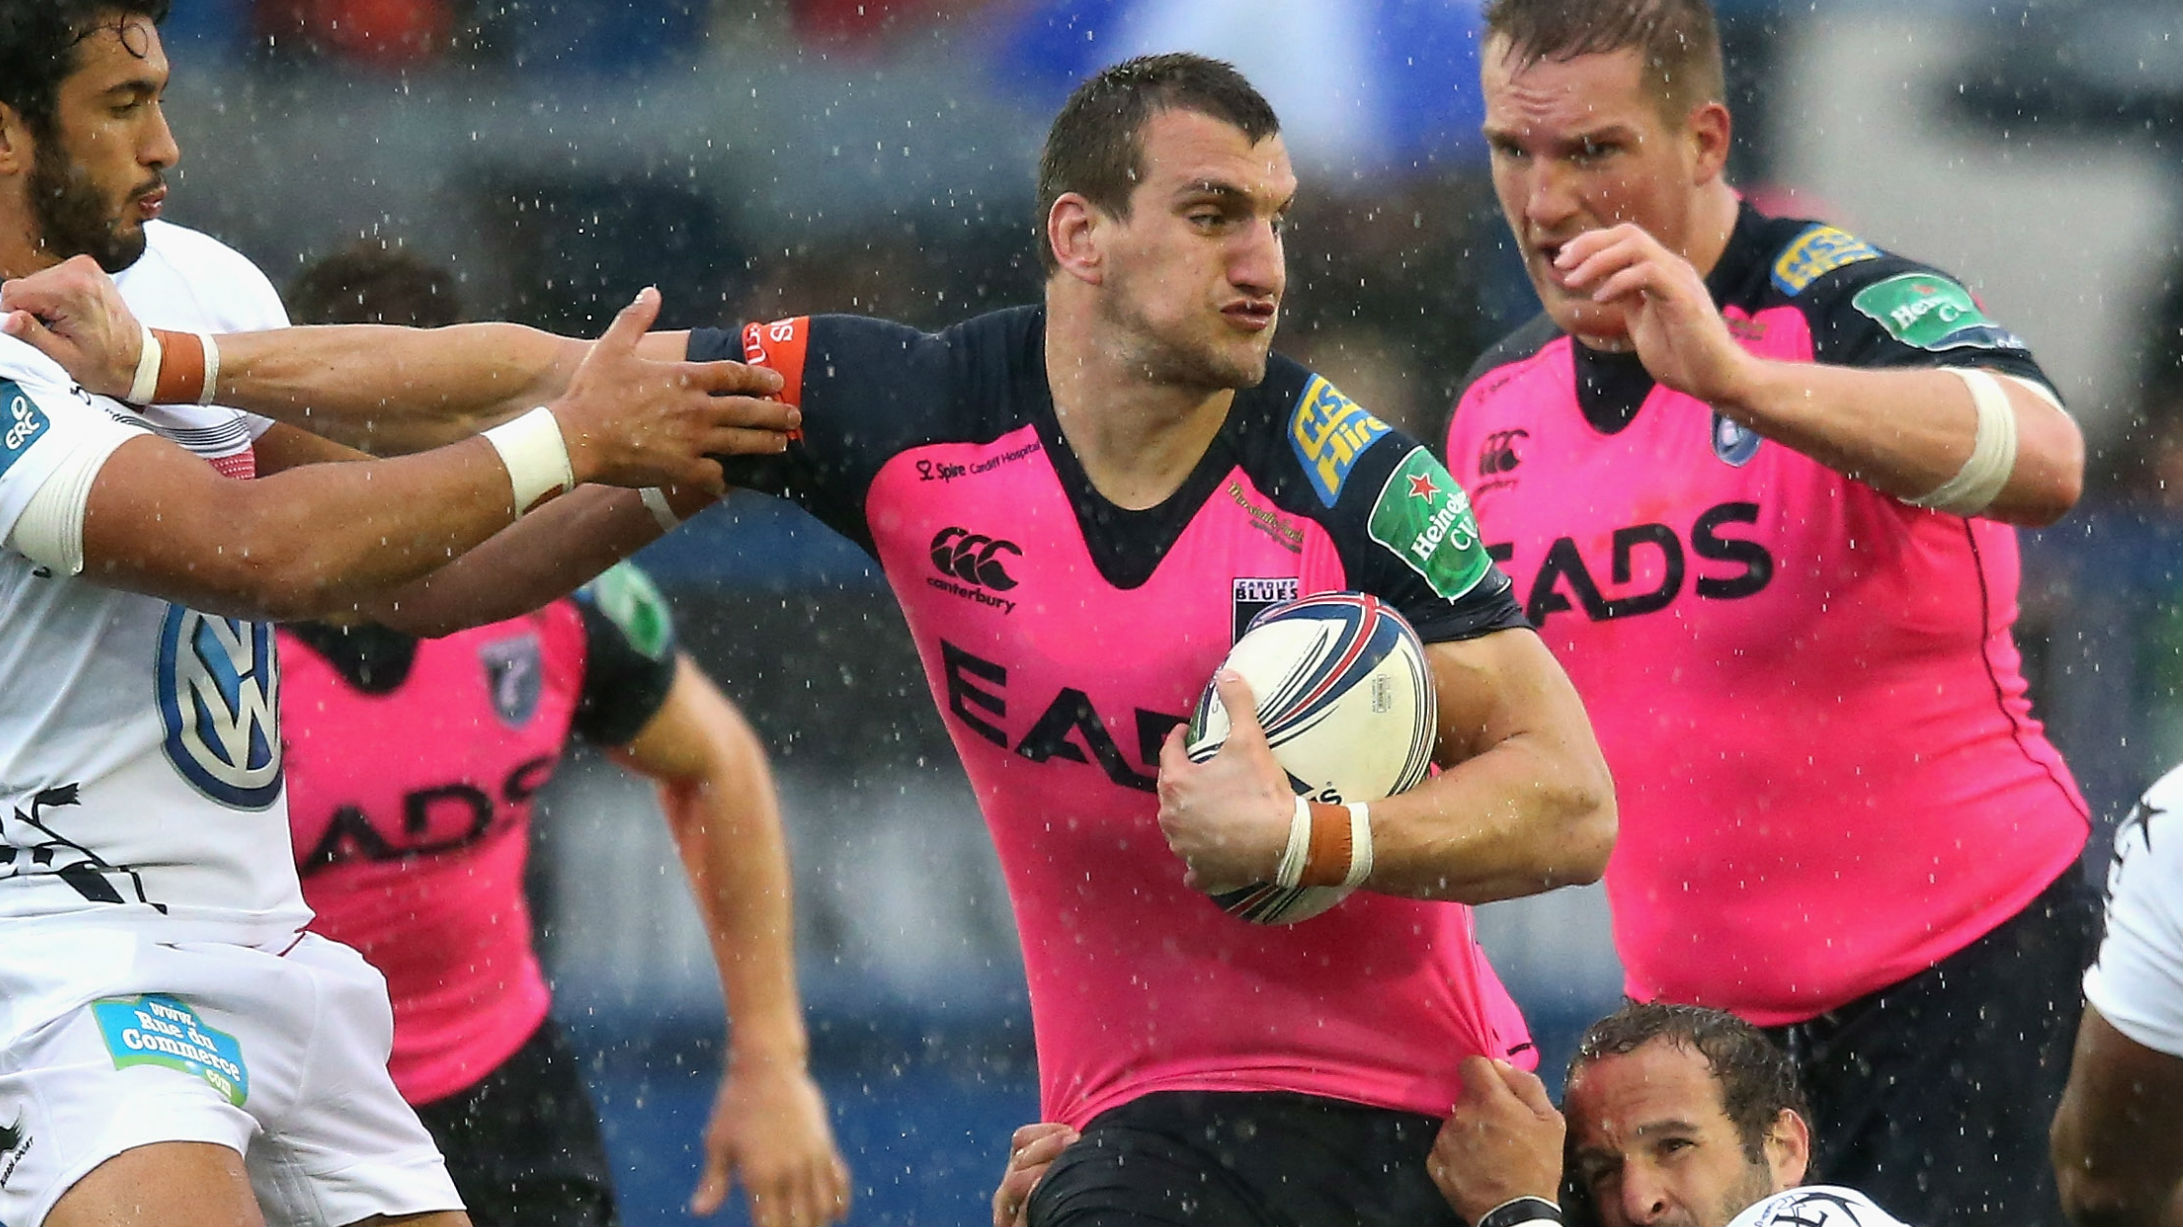 Sam Warburton fights off the tacklers